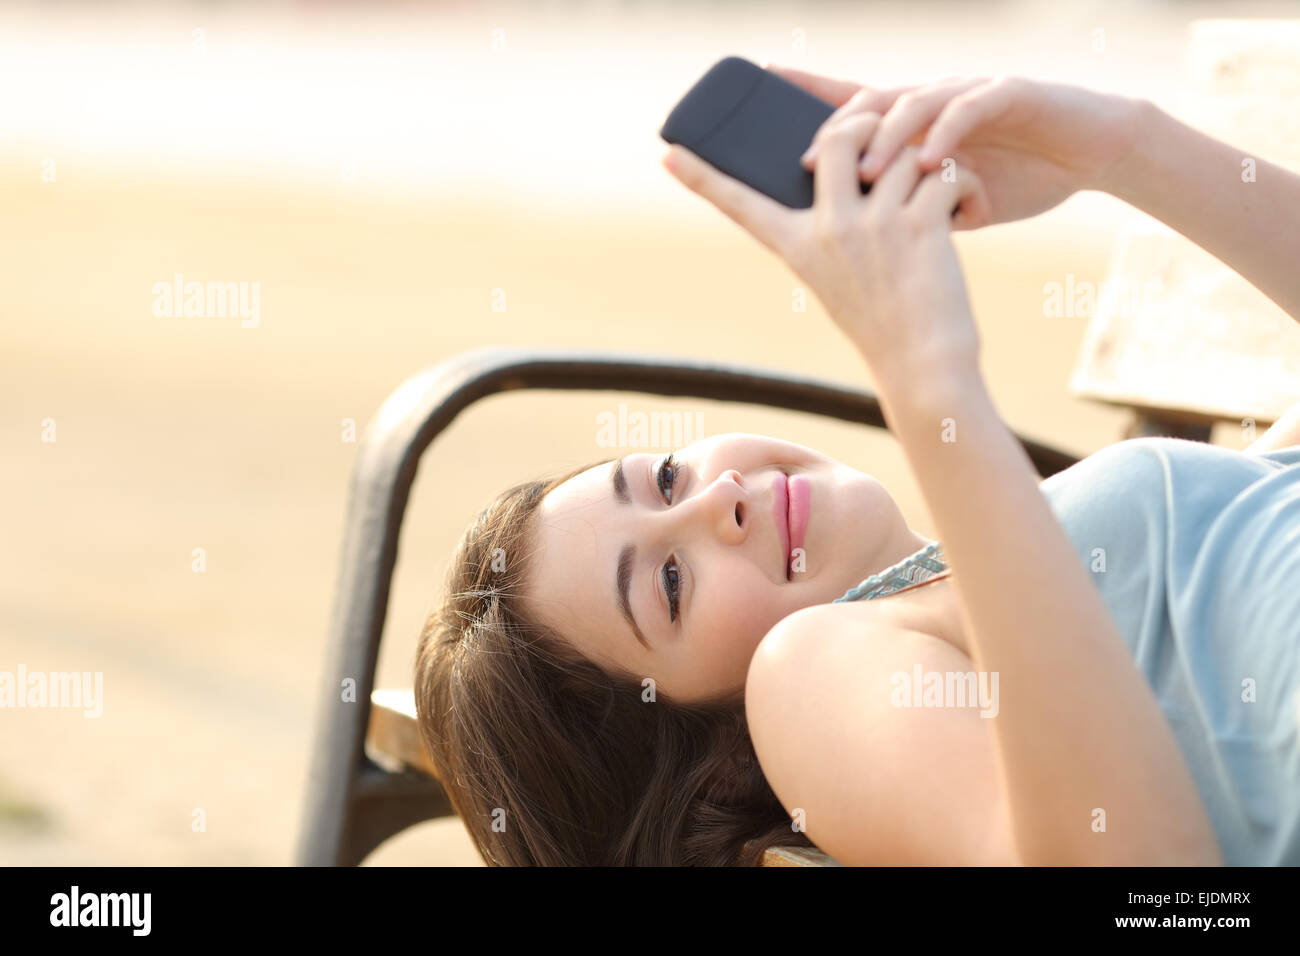 Happy candid teen girl using a smart phone lying in a bench Stock Photo